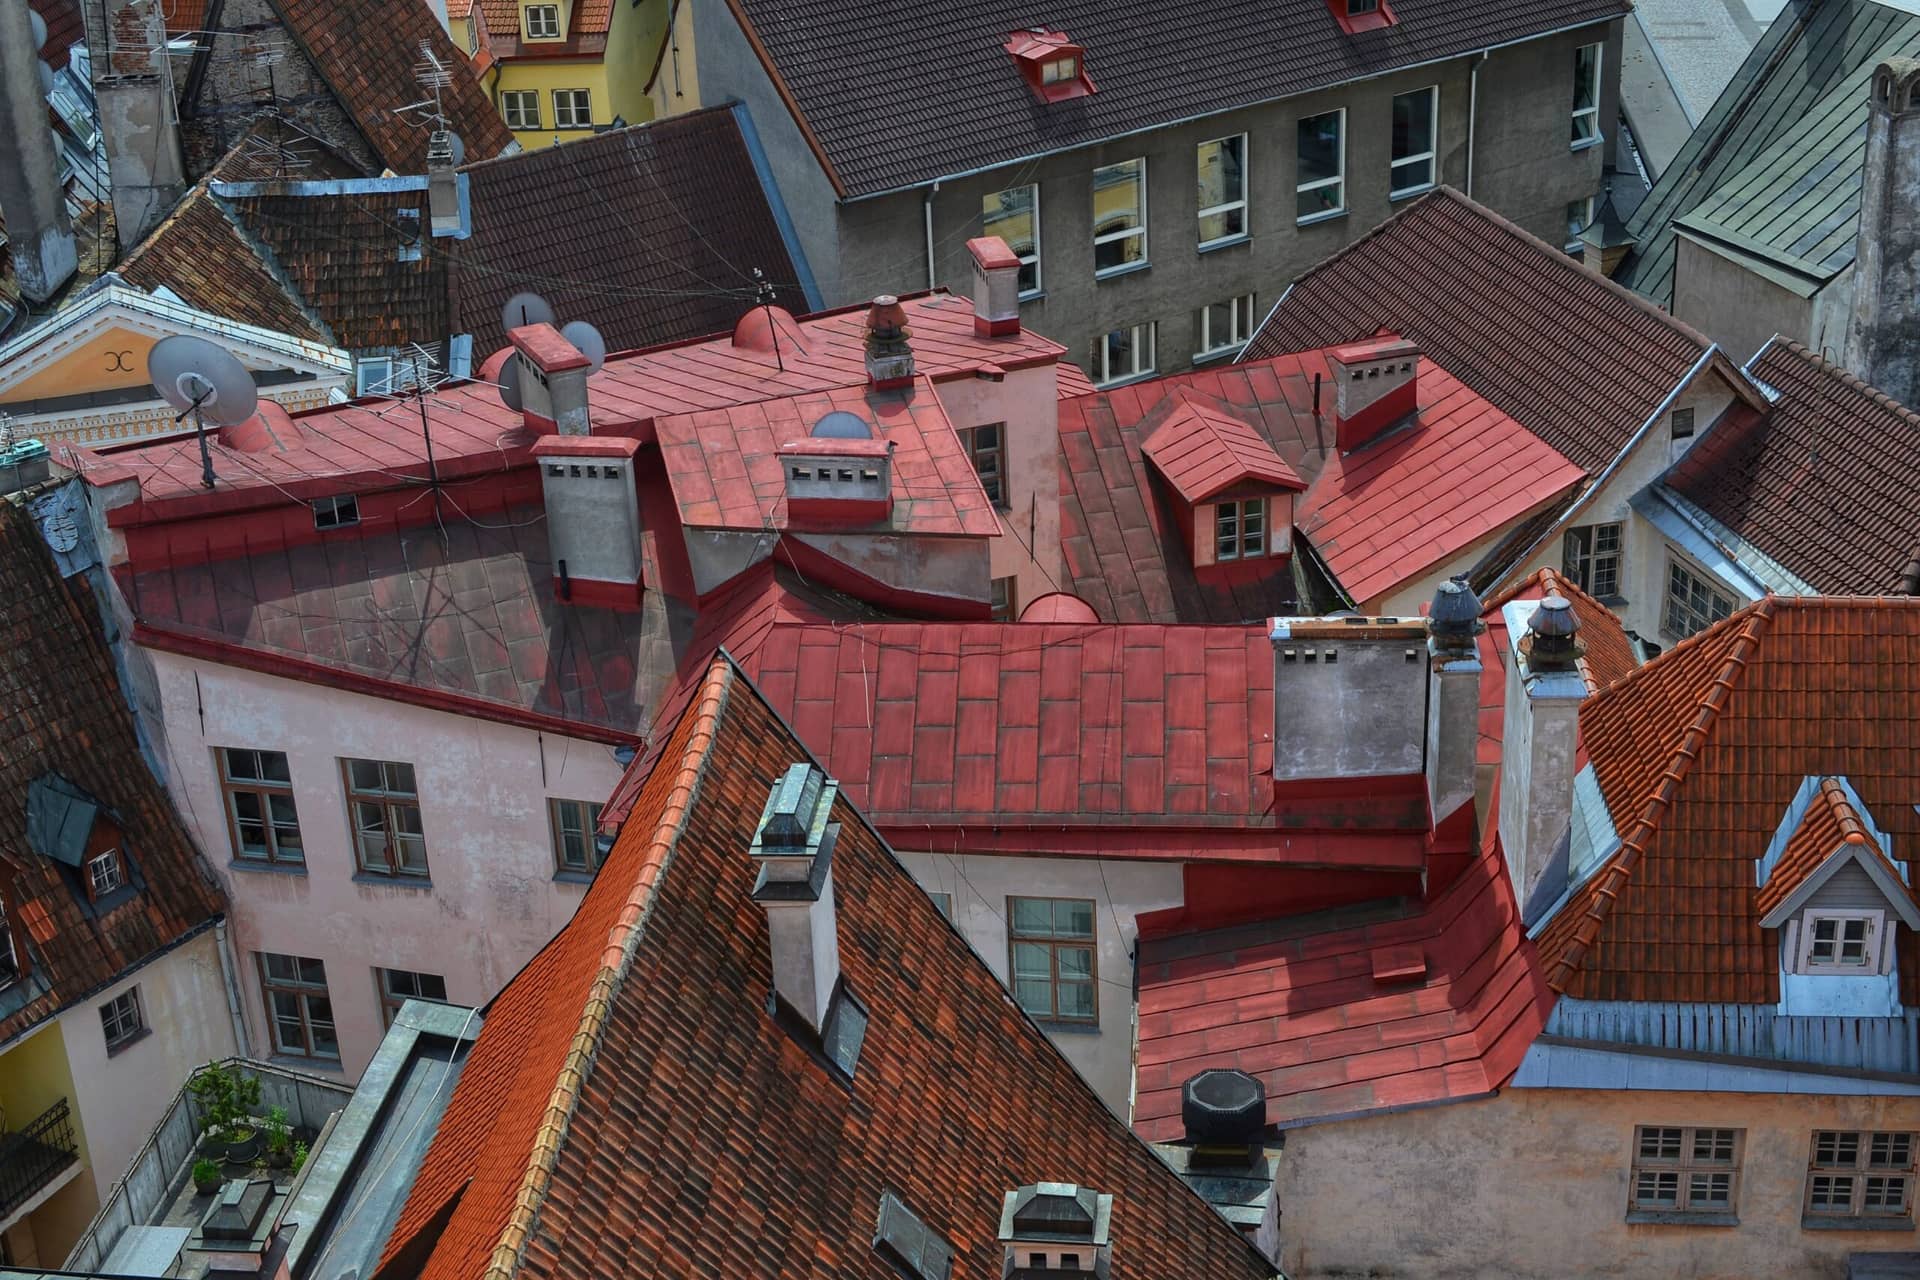 Aerial view of the roofs of the buildings in the old city